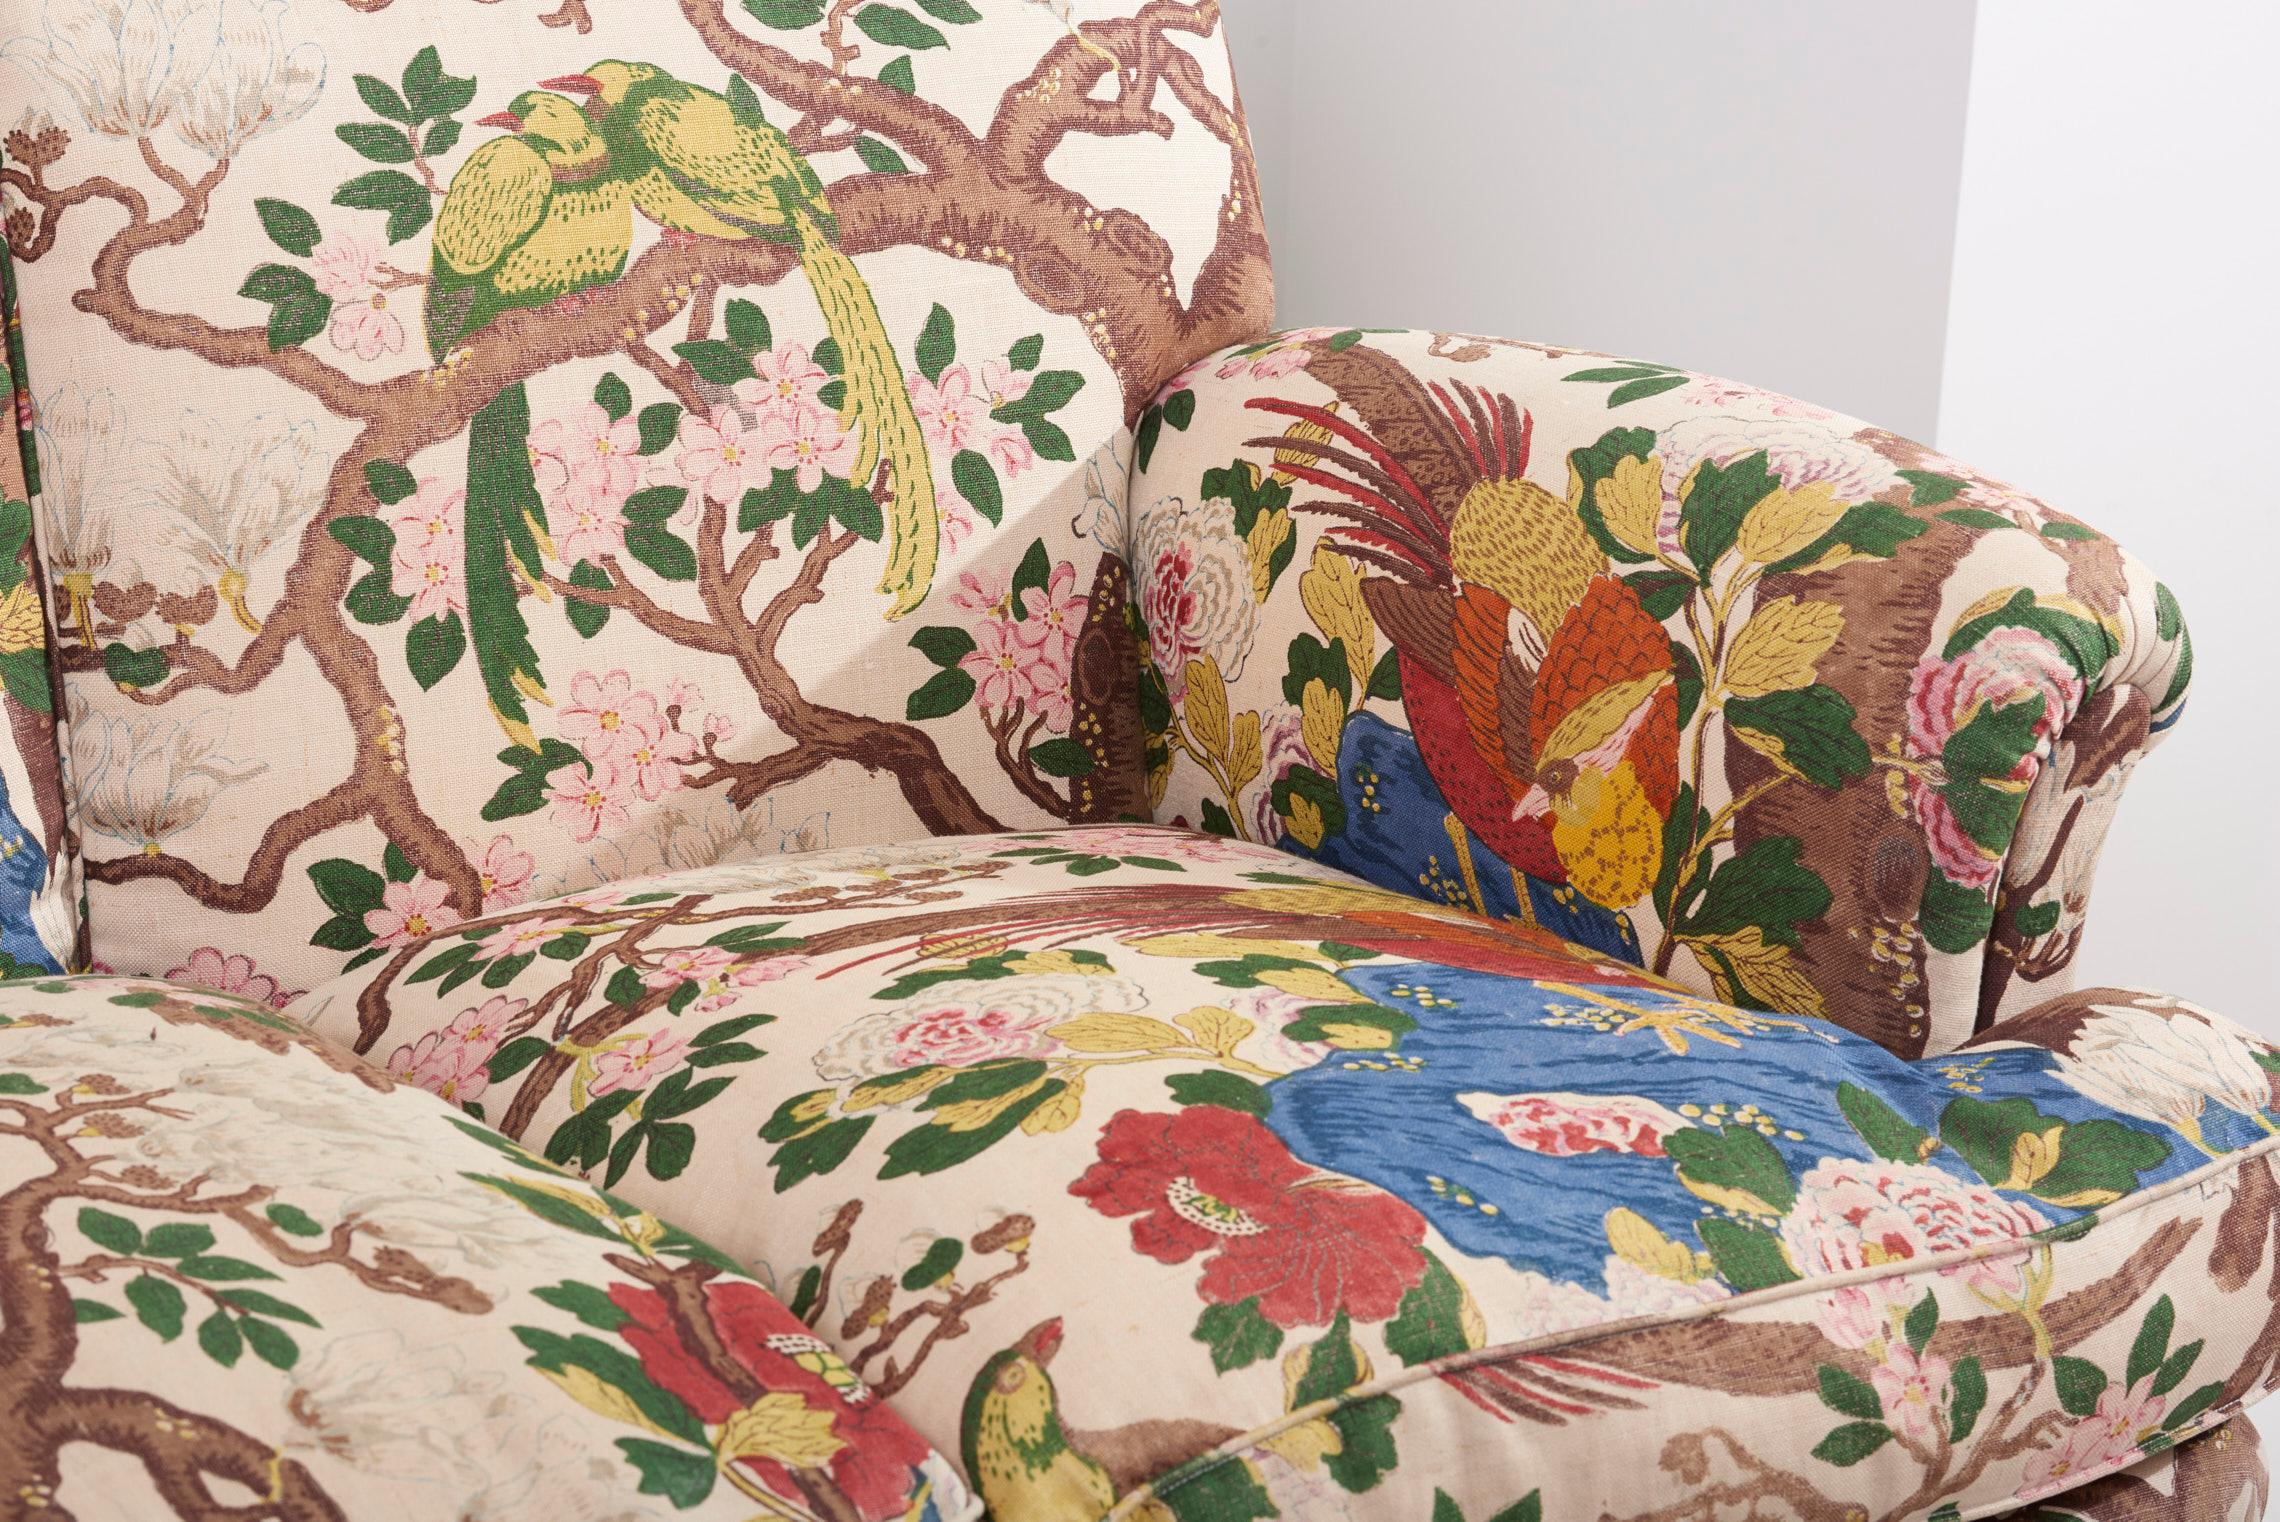 Swedish 4-Seat Sofa with Floral Fabric by Josef Frank for Svenskt Tenn, 1950s